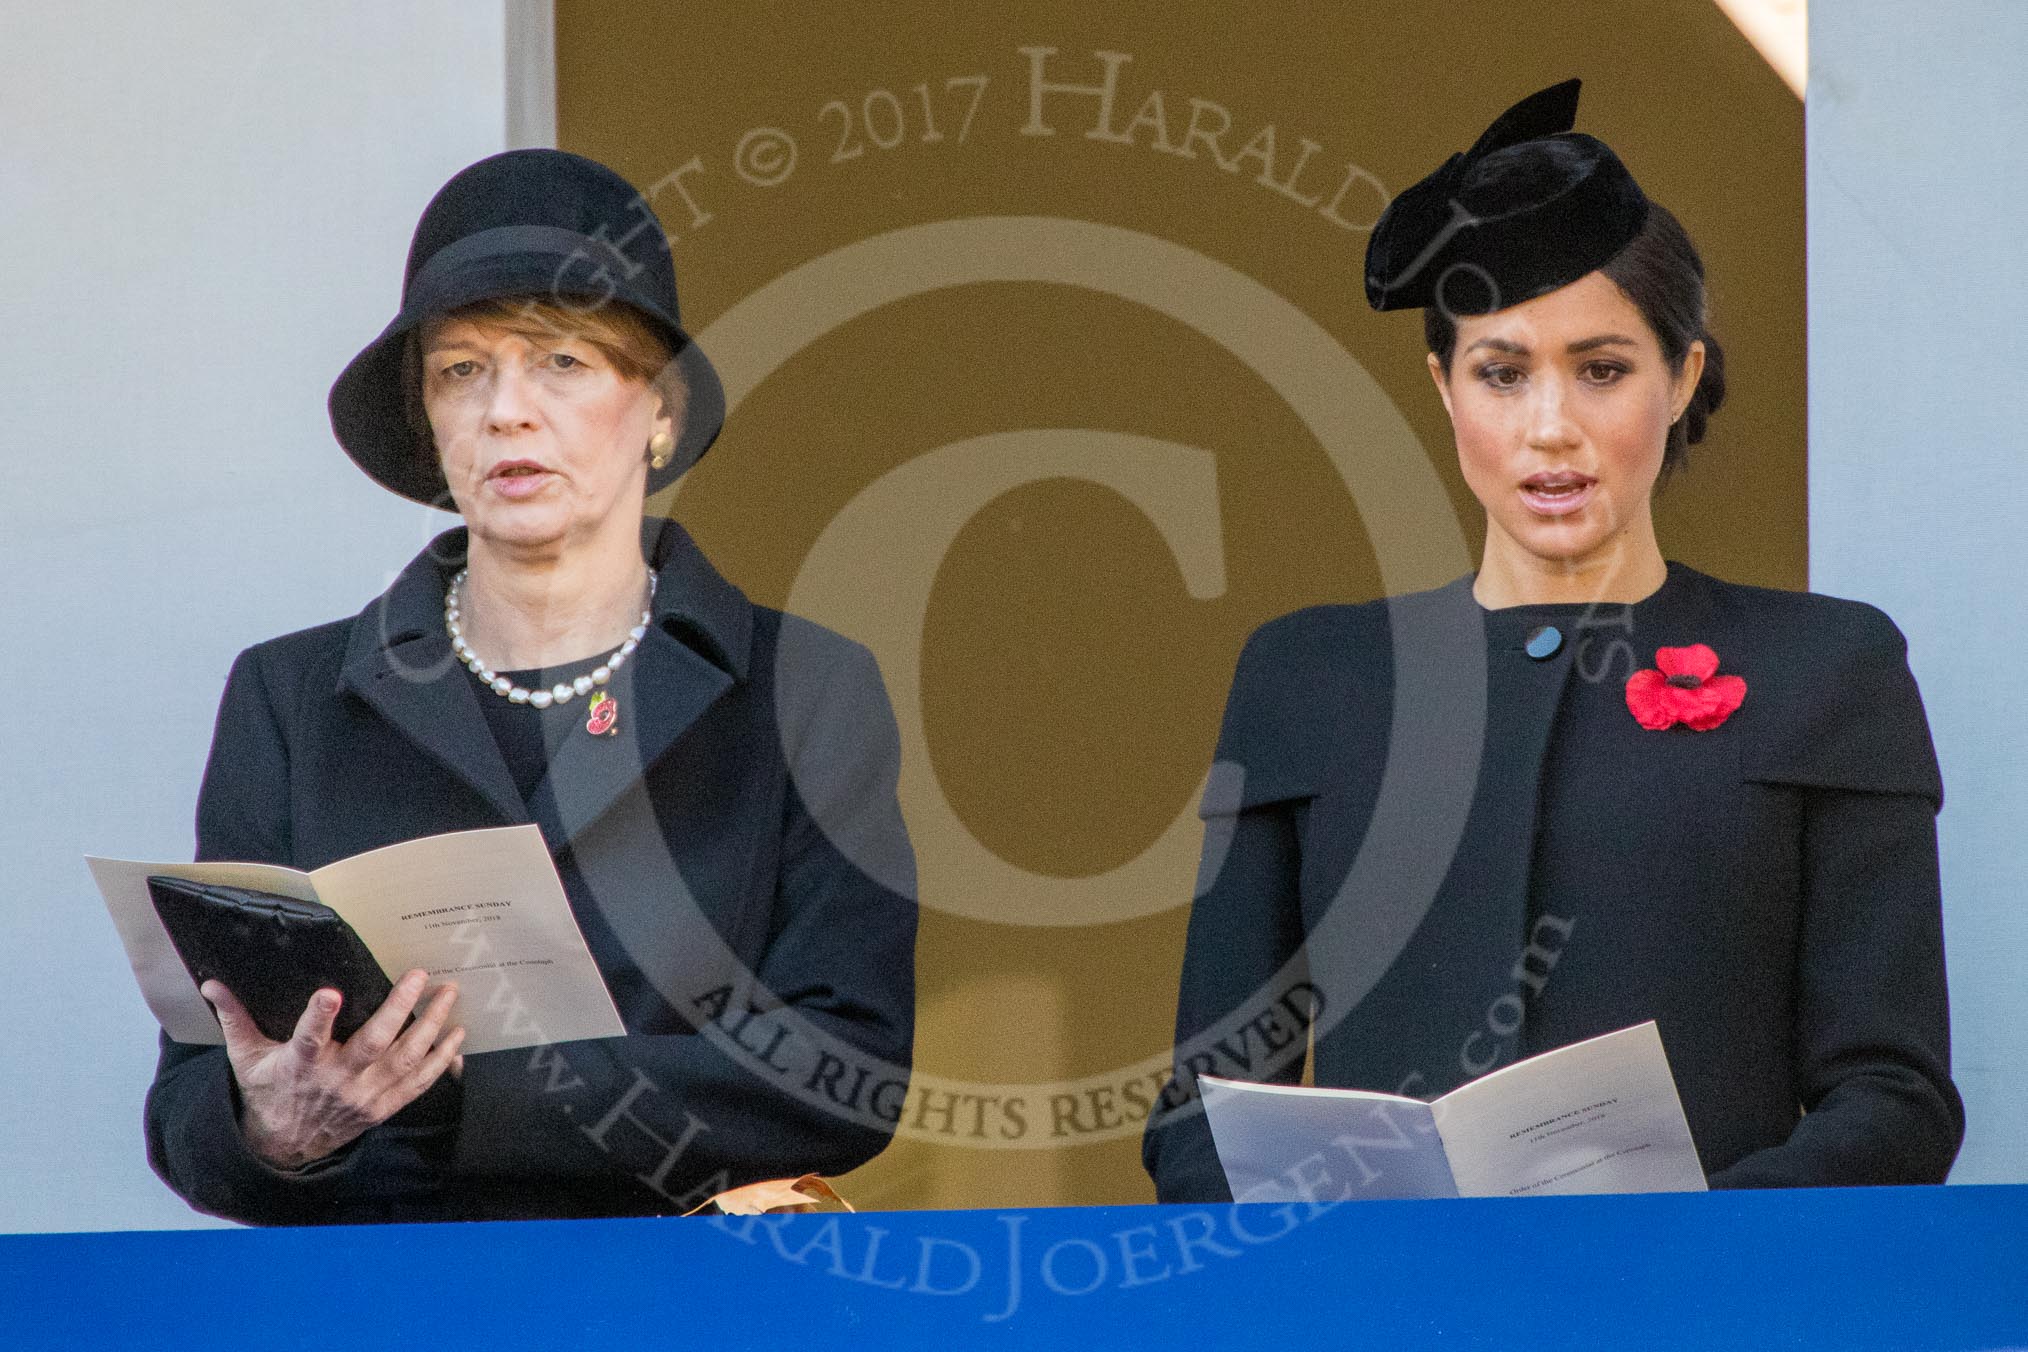 Mrs. Elke Büdenbender, wife of HE The President of the Federal Republic of Germany, Frank-Walter Steinmeier and HRH The Duchess of Sussex (Meghan), singing, on the balcony of the Foreign and Commonwealth Office during the Remembrance Sunday Cenotaph Ceremony 2018 at Horse Guards Parade, Westminster, London, 11 November 2018, 11:18.